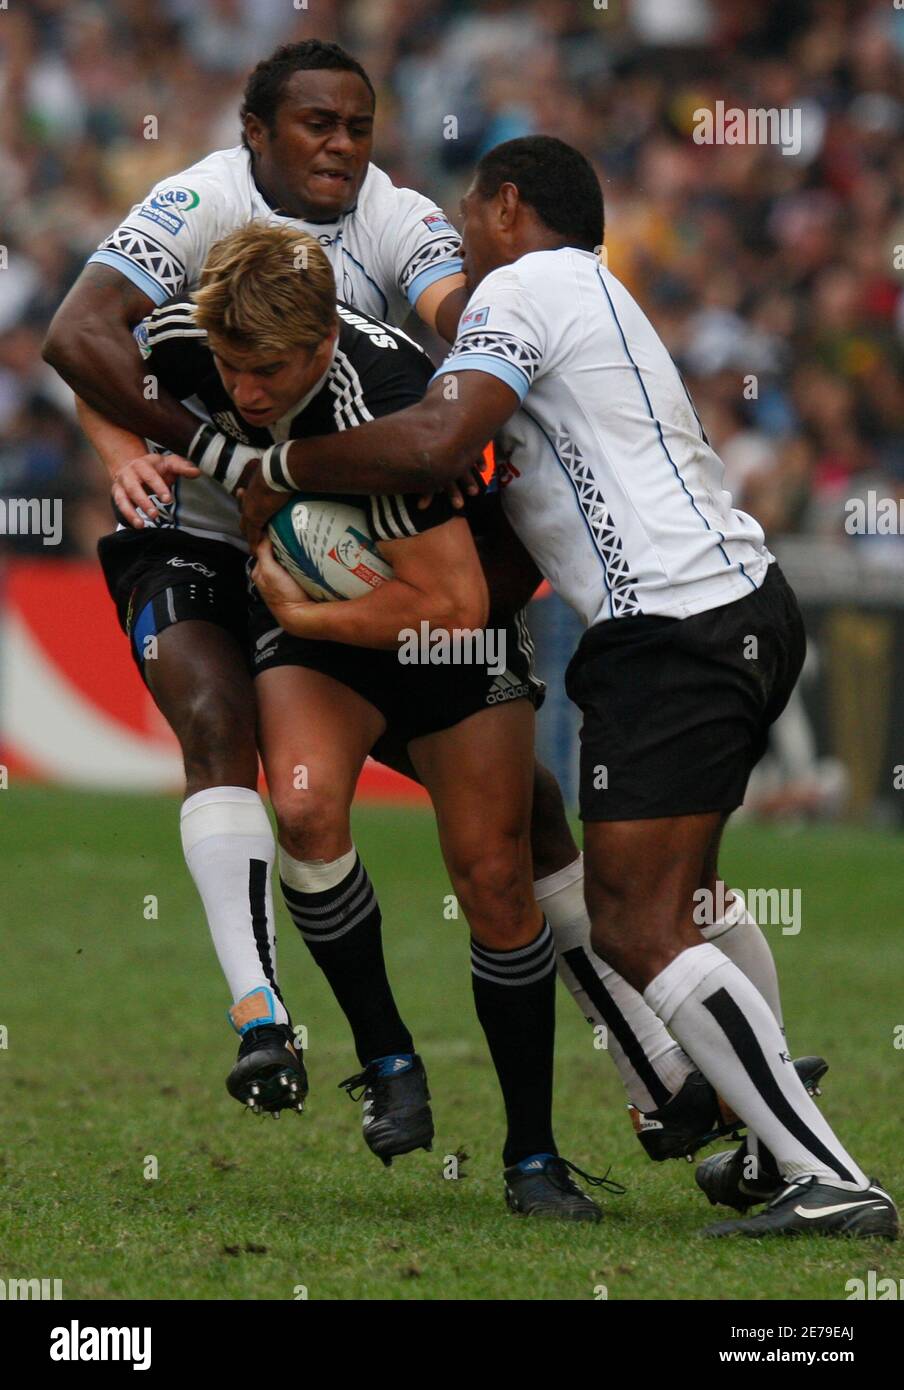 New Zealand's Ben Souness (C) is tackled by Fiji's Pio Tuwai (L) and Etonia Naba during the Cup semi-finals of the Hong Kong Sevens rugby tournament March 28, 2010.   REUTERS/Bobby Yip  (CHINA - Tags: SPORT RUGBY) Stock Photo